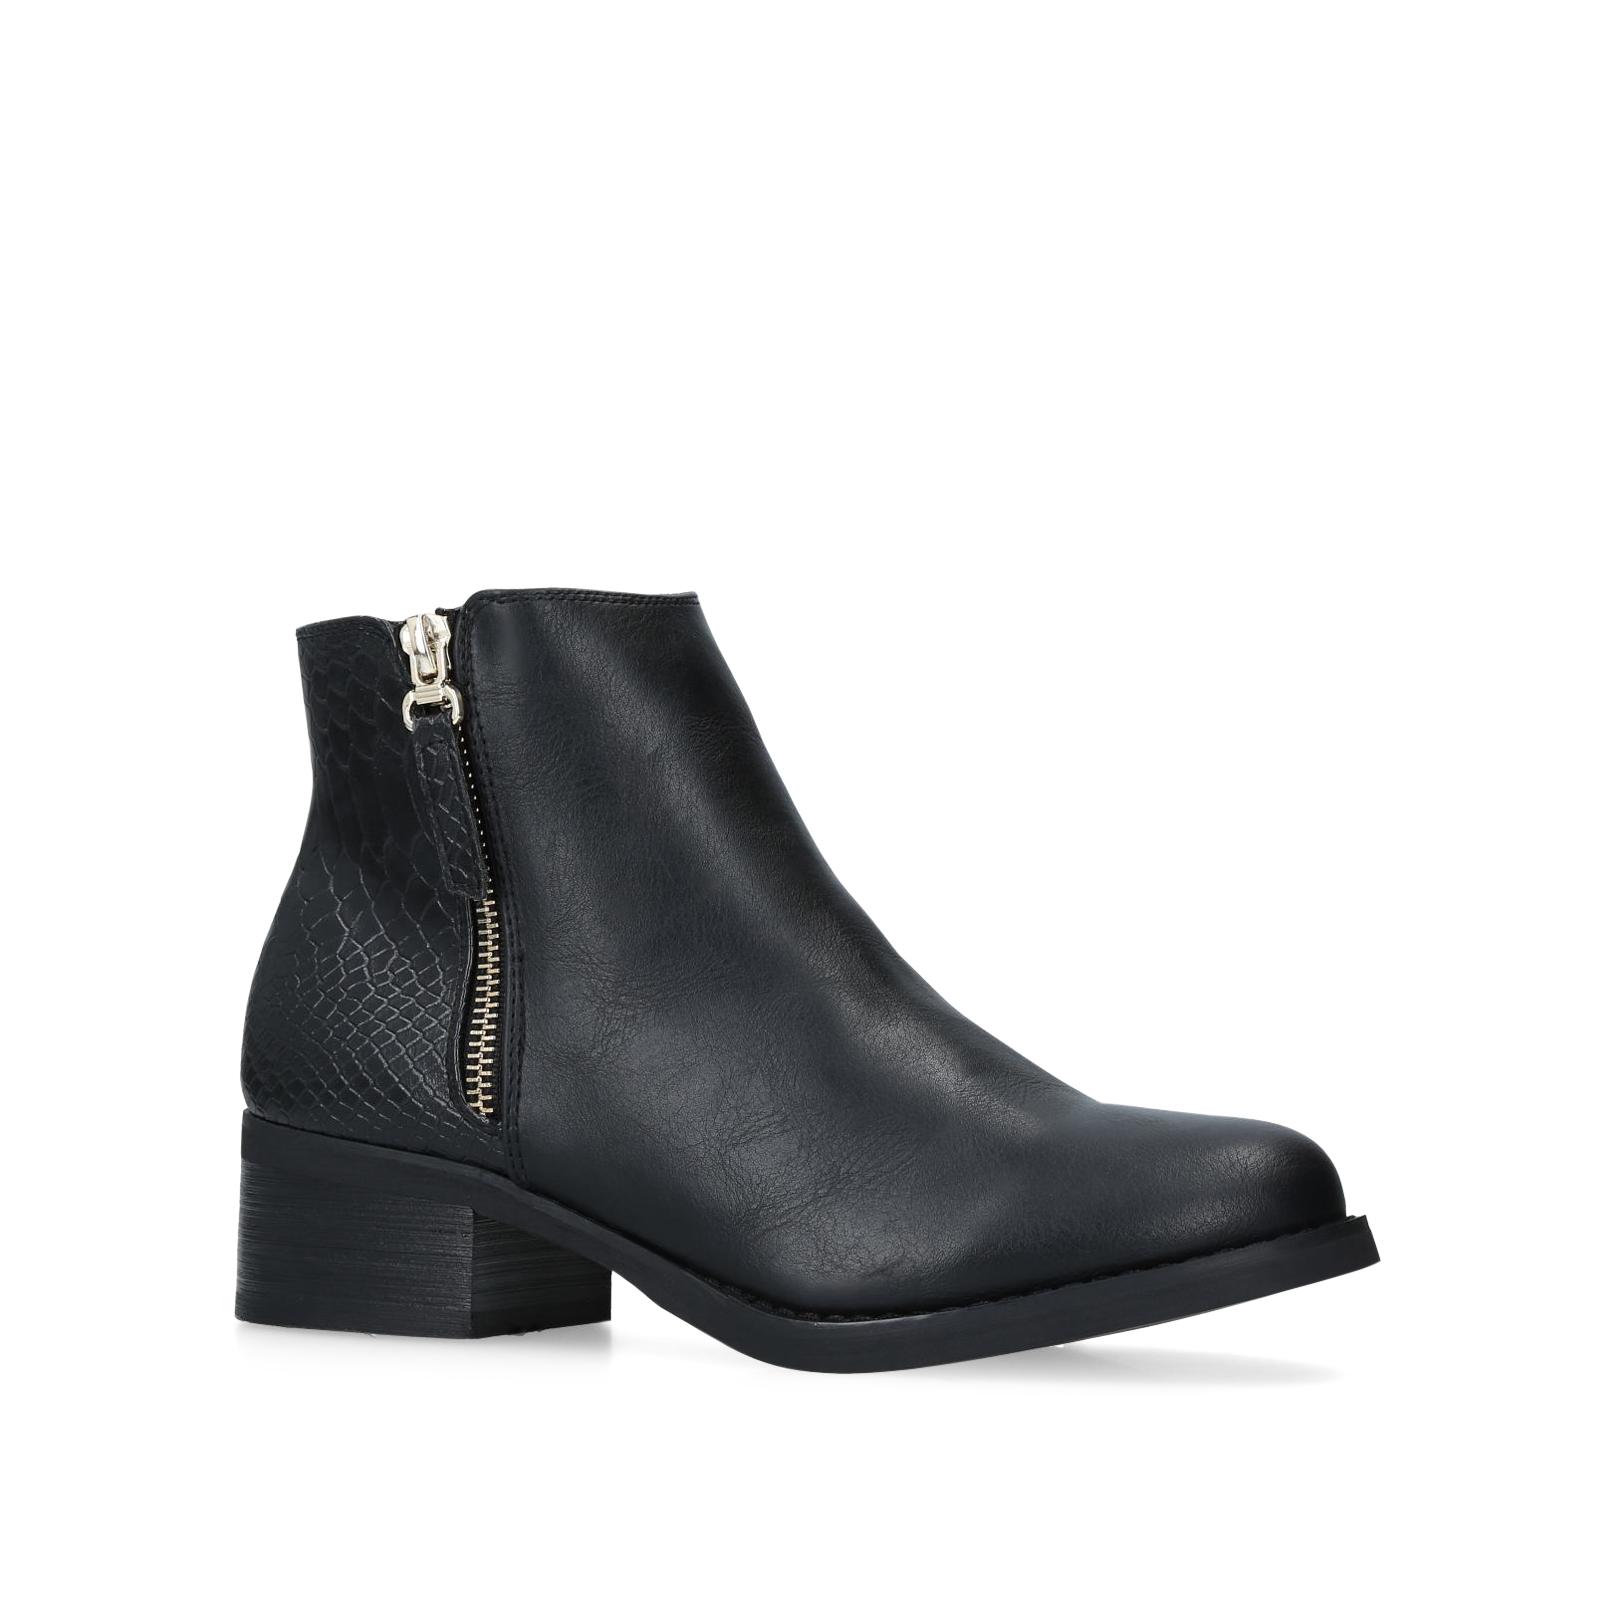 JANICE - MISS KG Ankle Boots